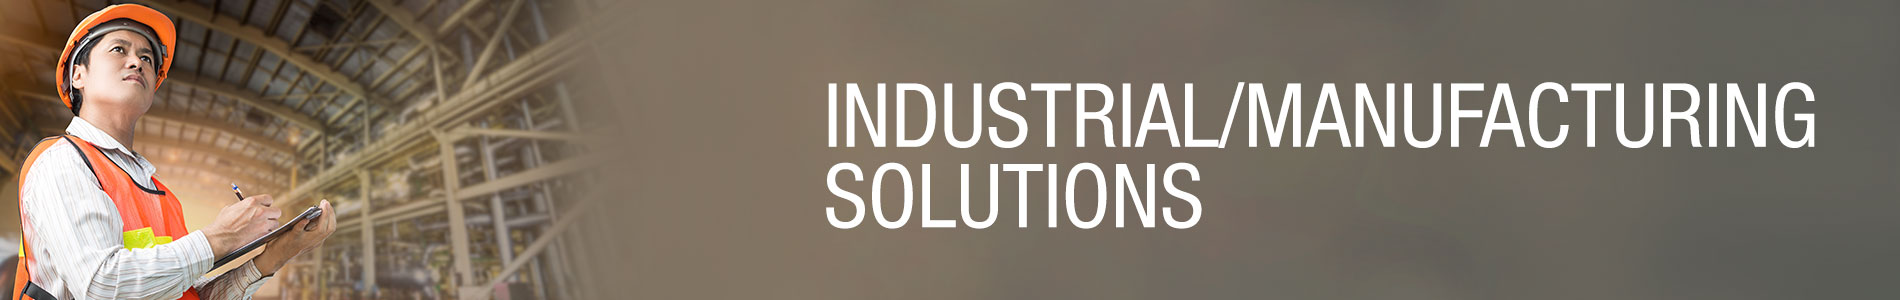 Industrial Manufacturing Solutions Main Page Banner